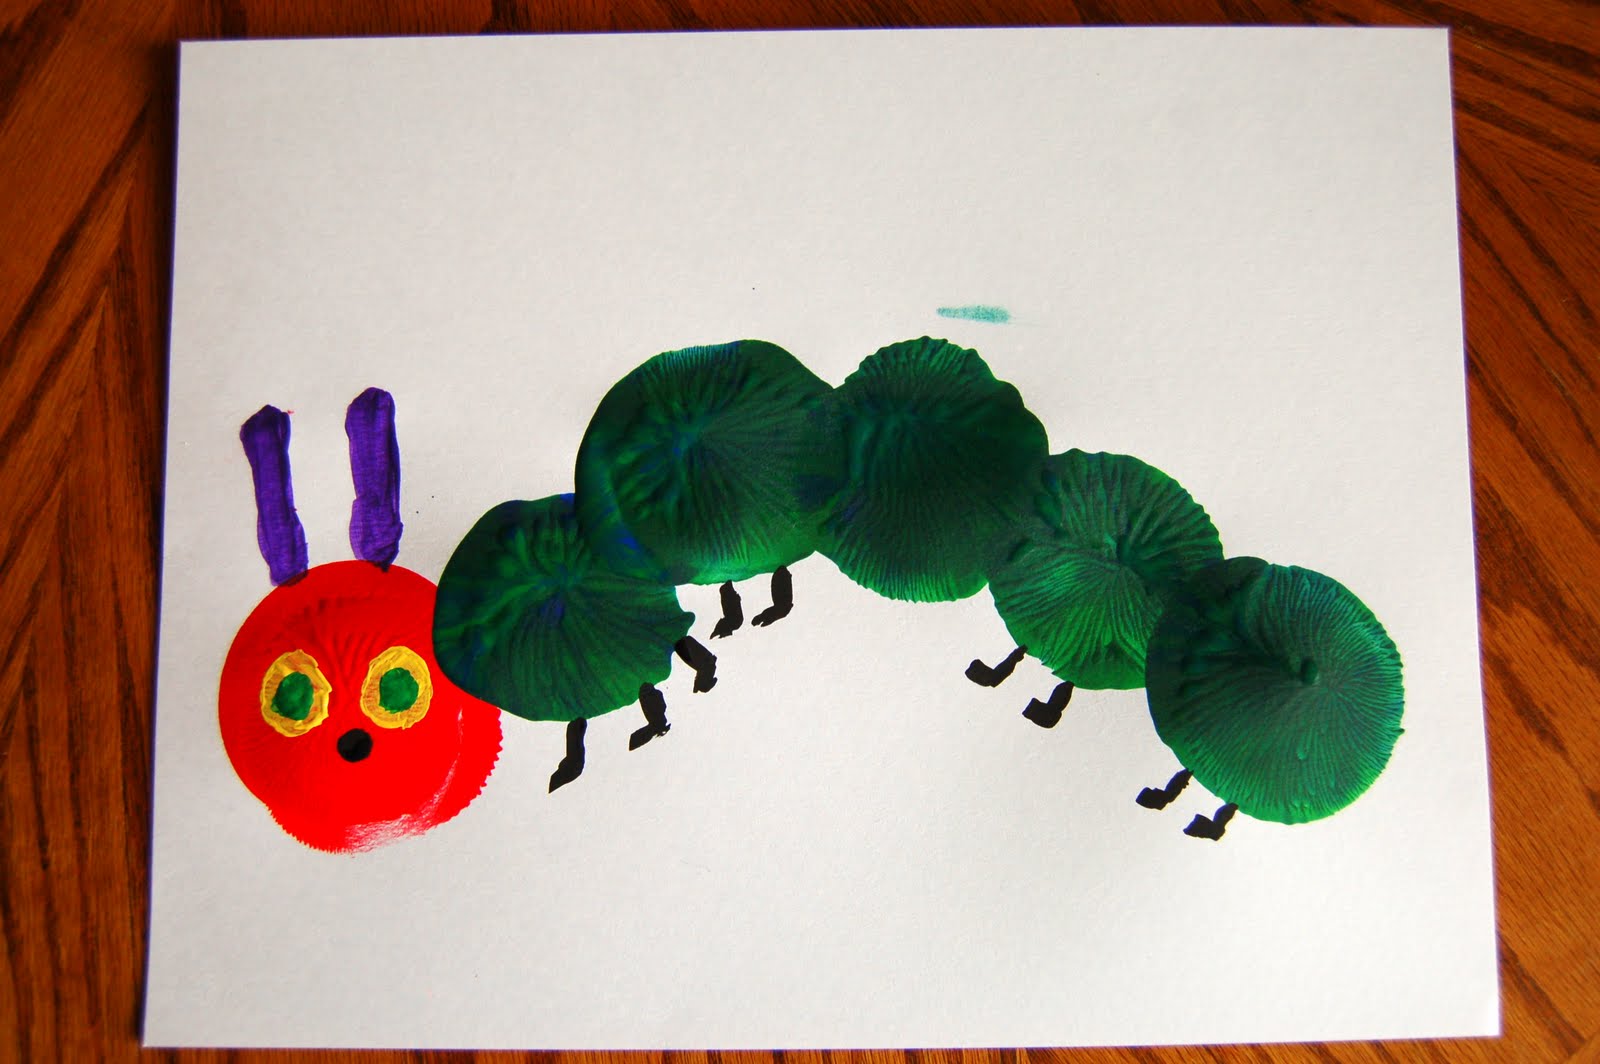 Story Time "The Very Hungry Caterpillar" With Crafts I Heart Crafty